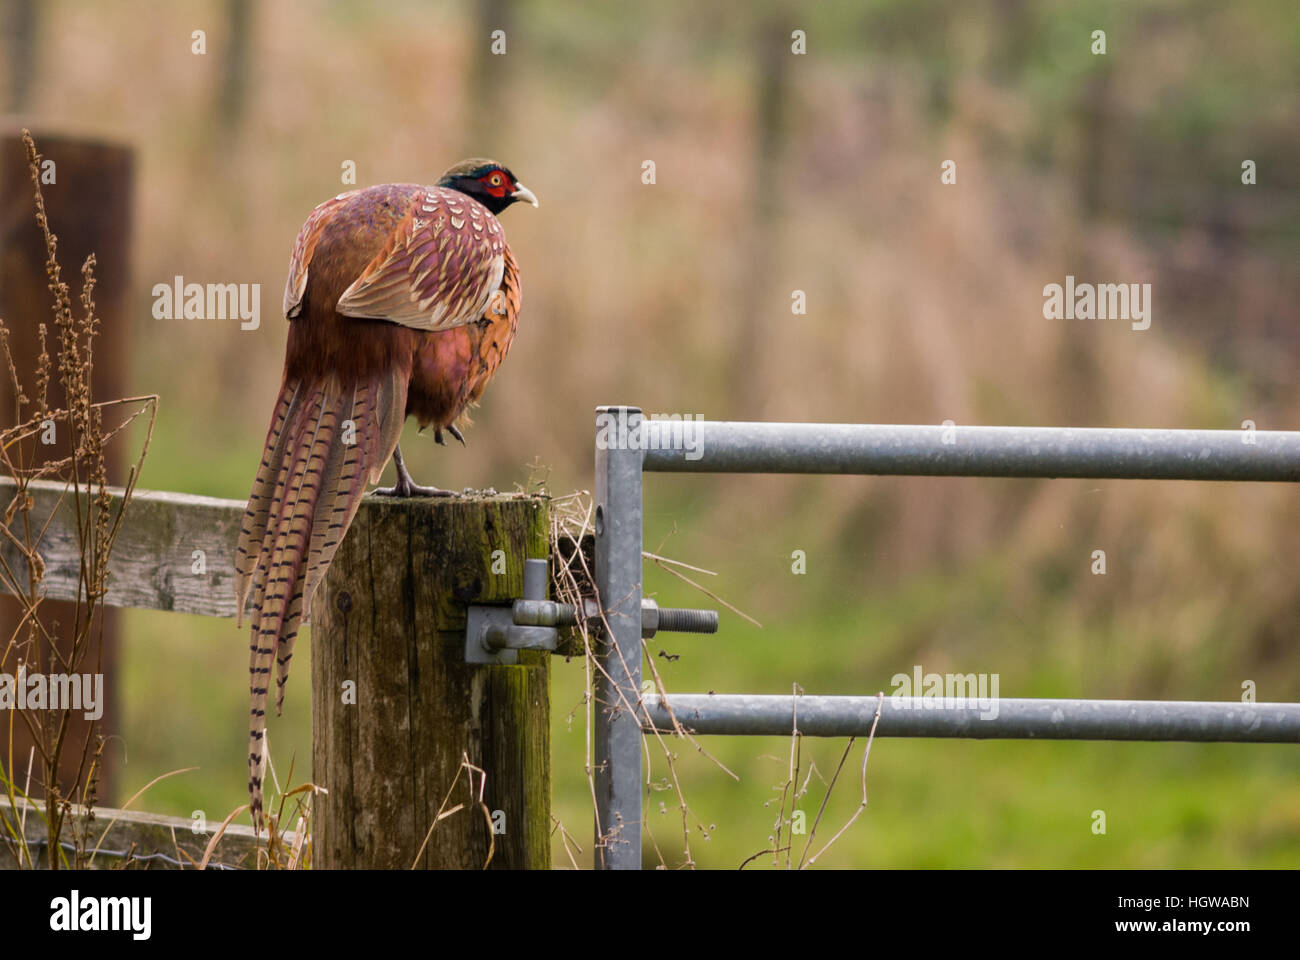 A male Ring-necked pheasant (Phasianus colchicus) stands on one leg as it rests on a wooden gatepost next to a metal gate Stock Photo